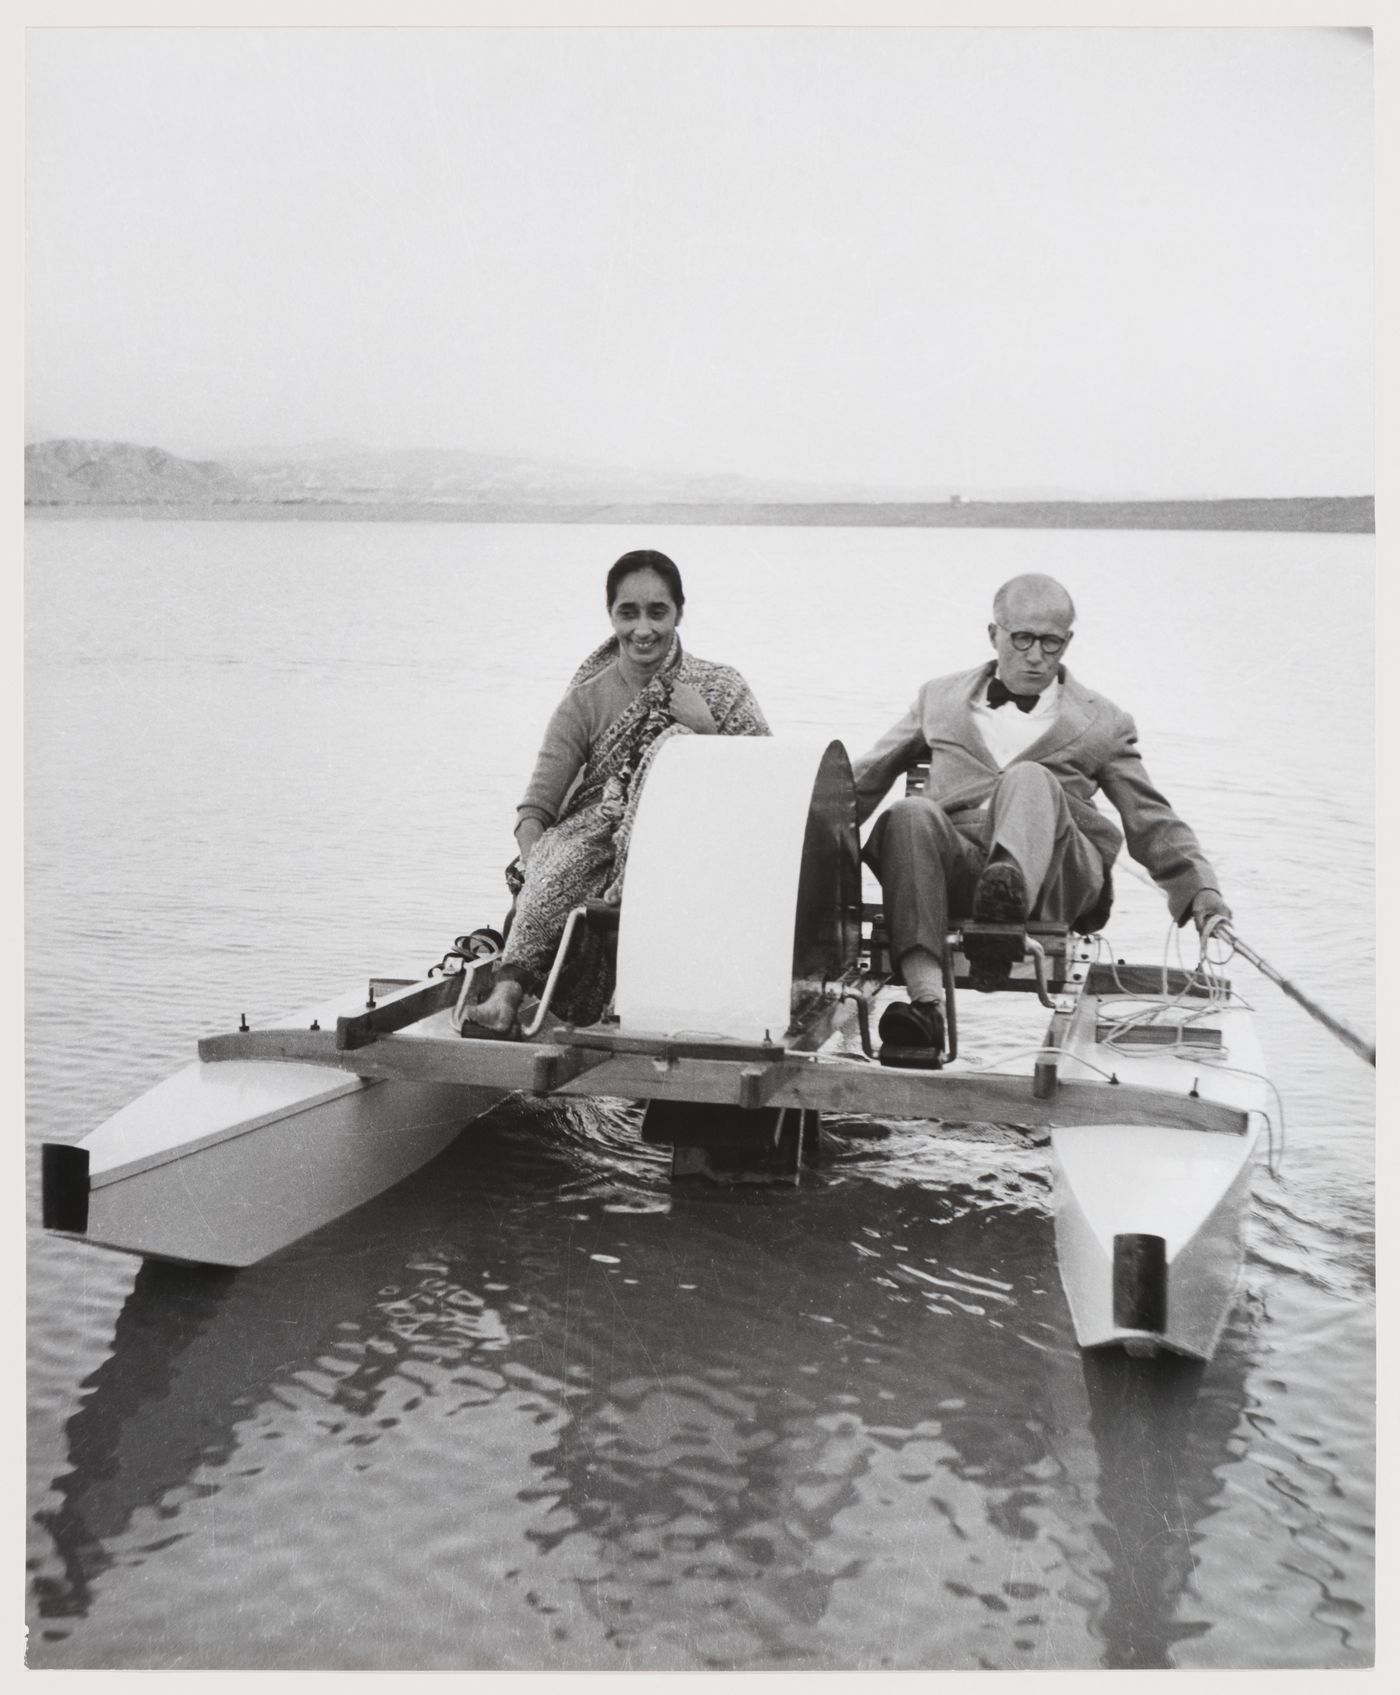 Mrs. P. L. Varma and Pierre Jeanneret at Sukhna Lake in Chandigarh